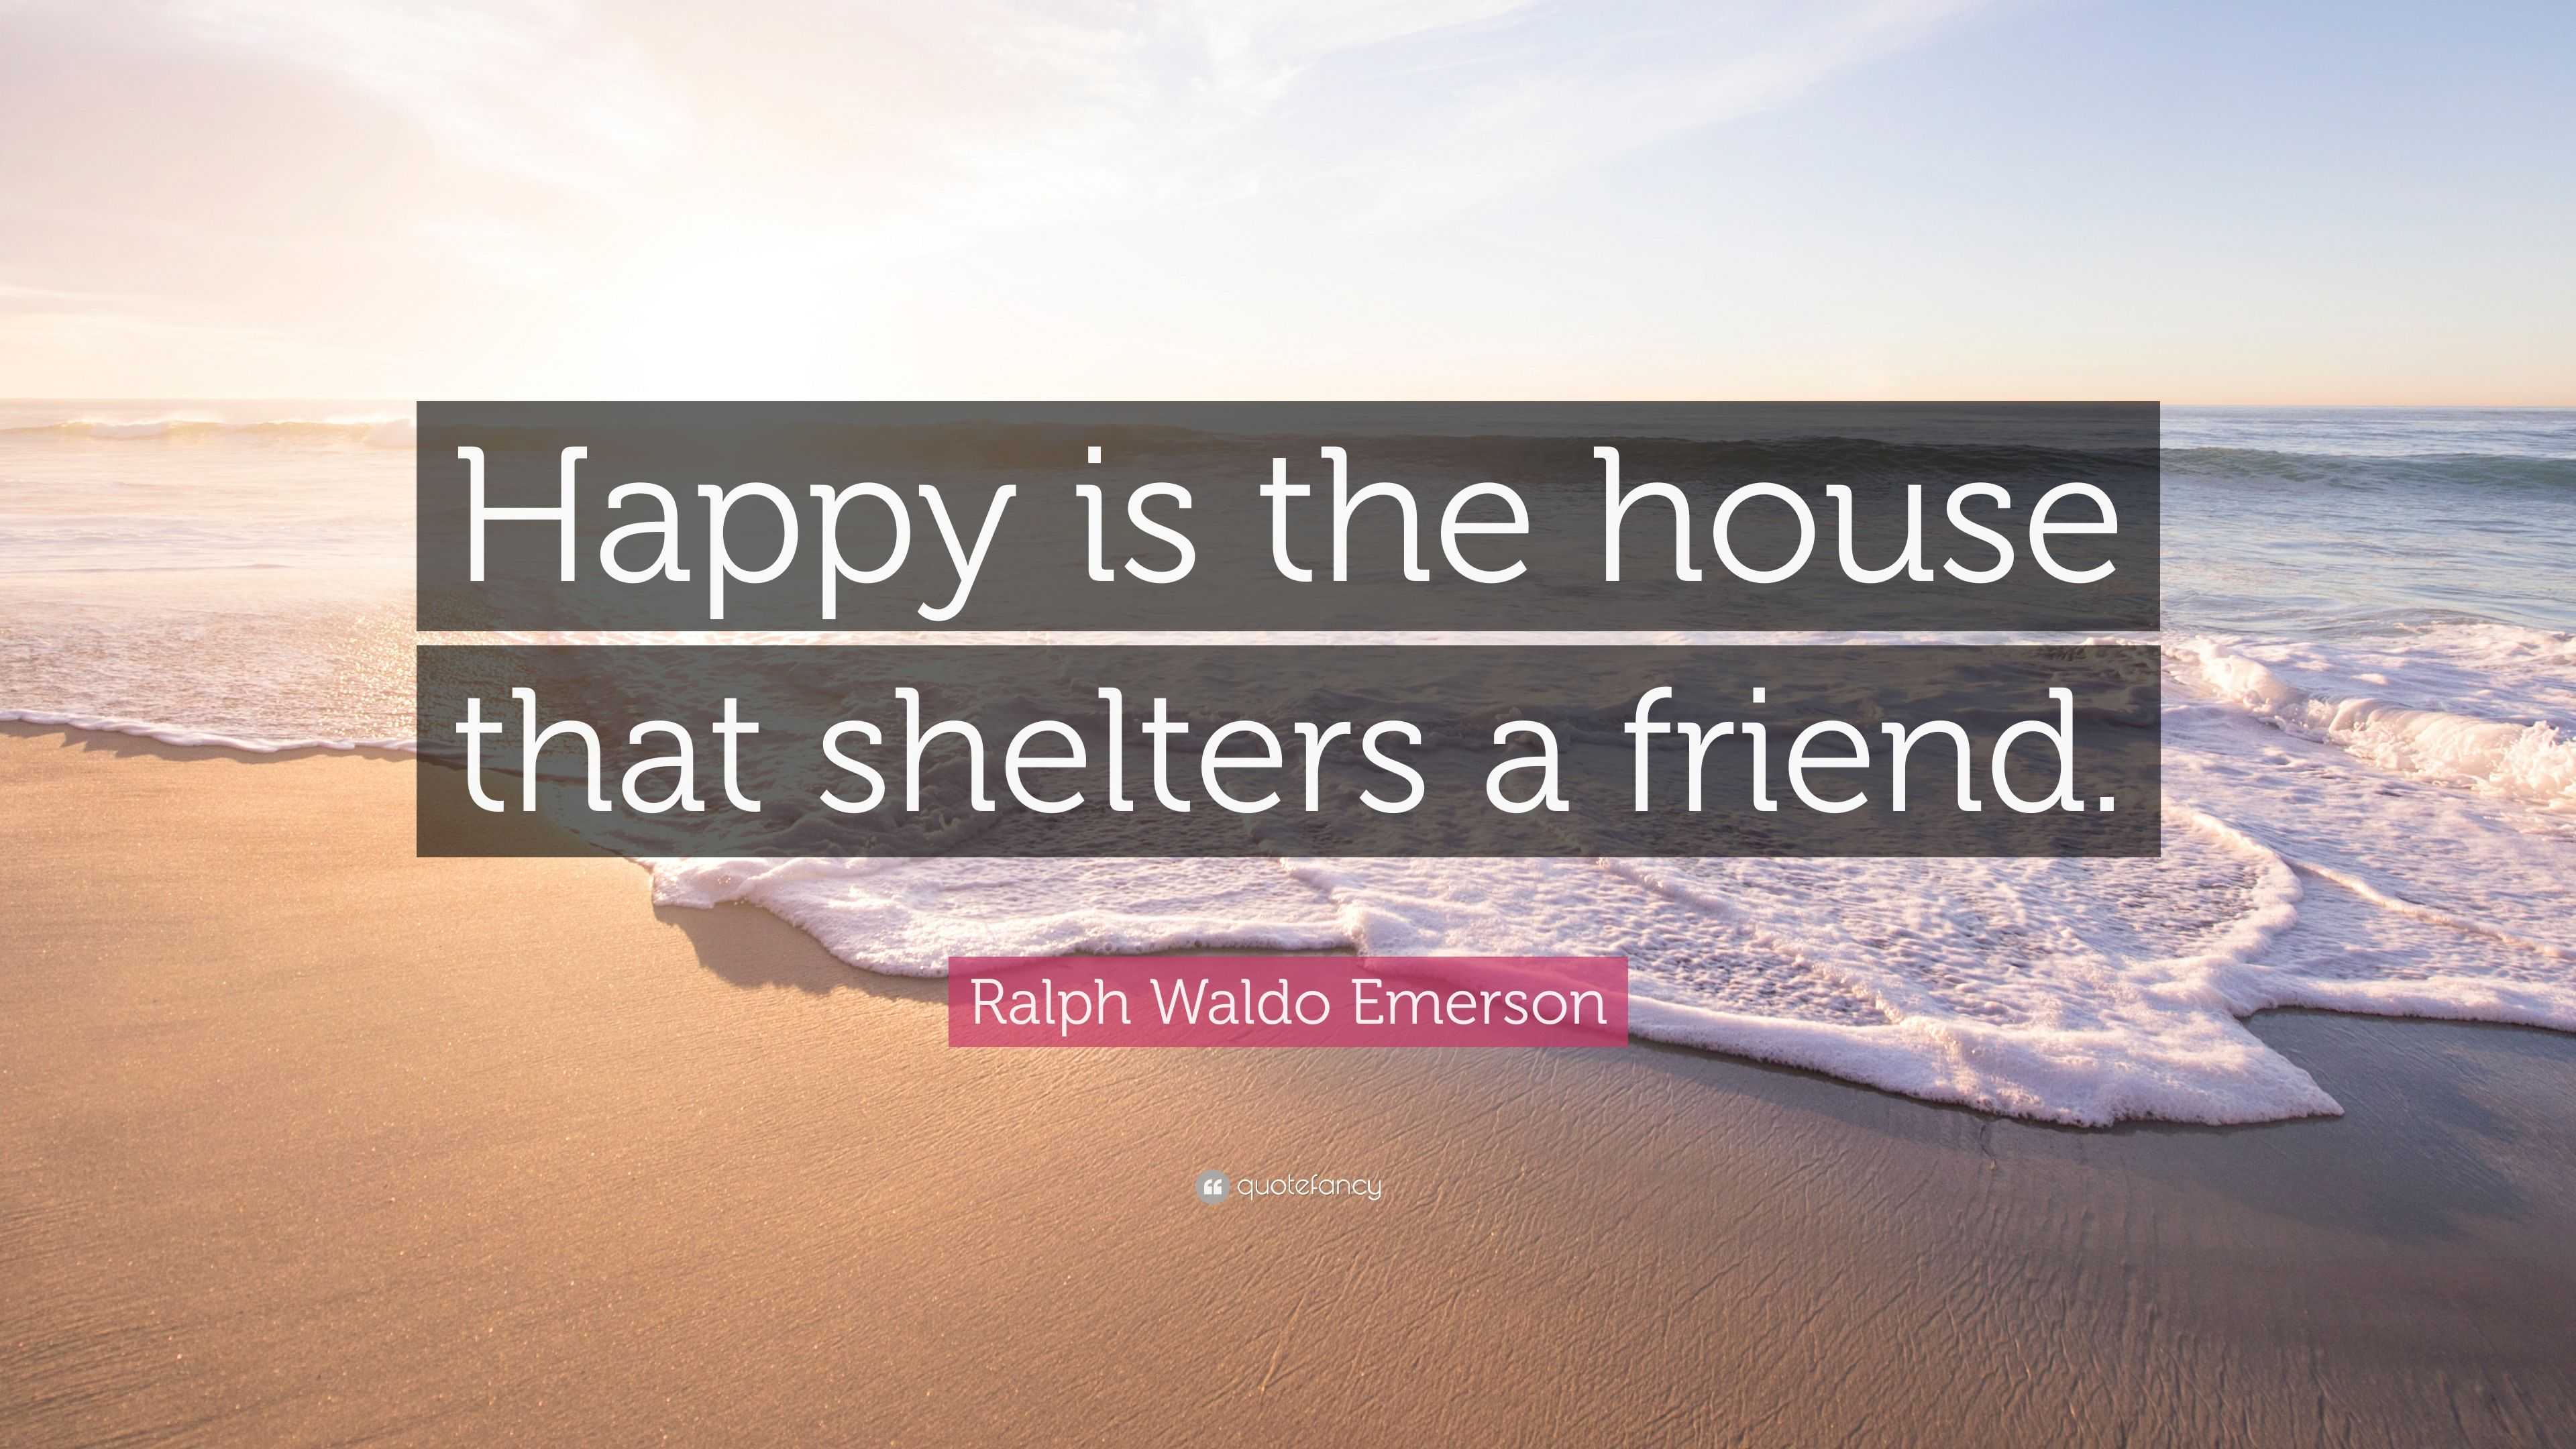 Ralph Waldo Emerson Quote: “Happy is the house that shelters a friend.”